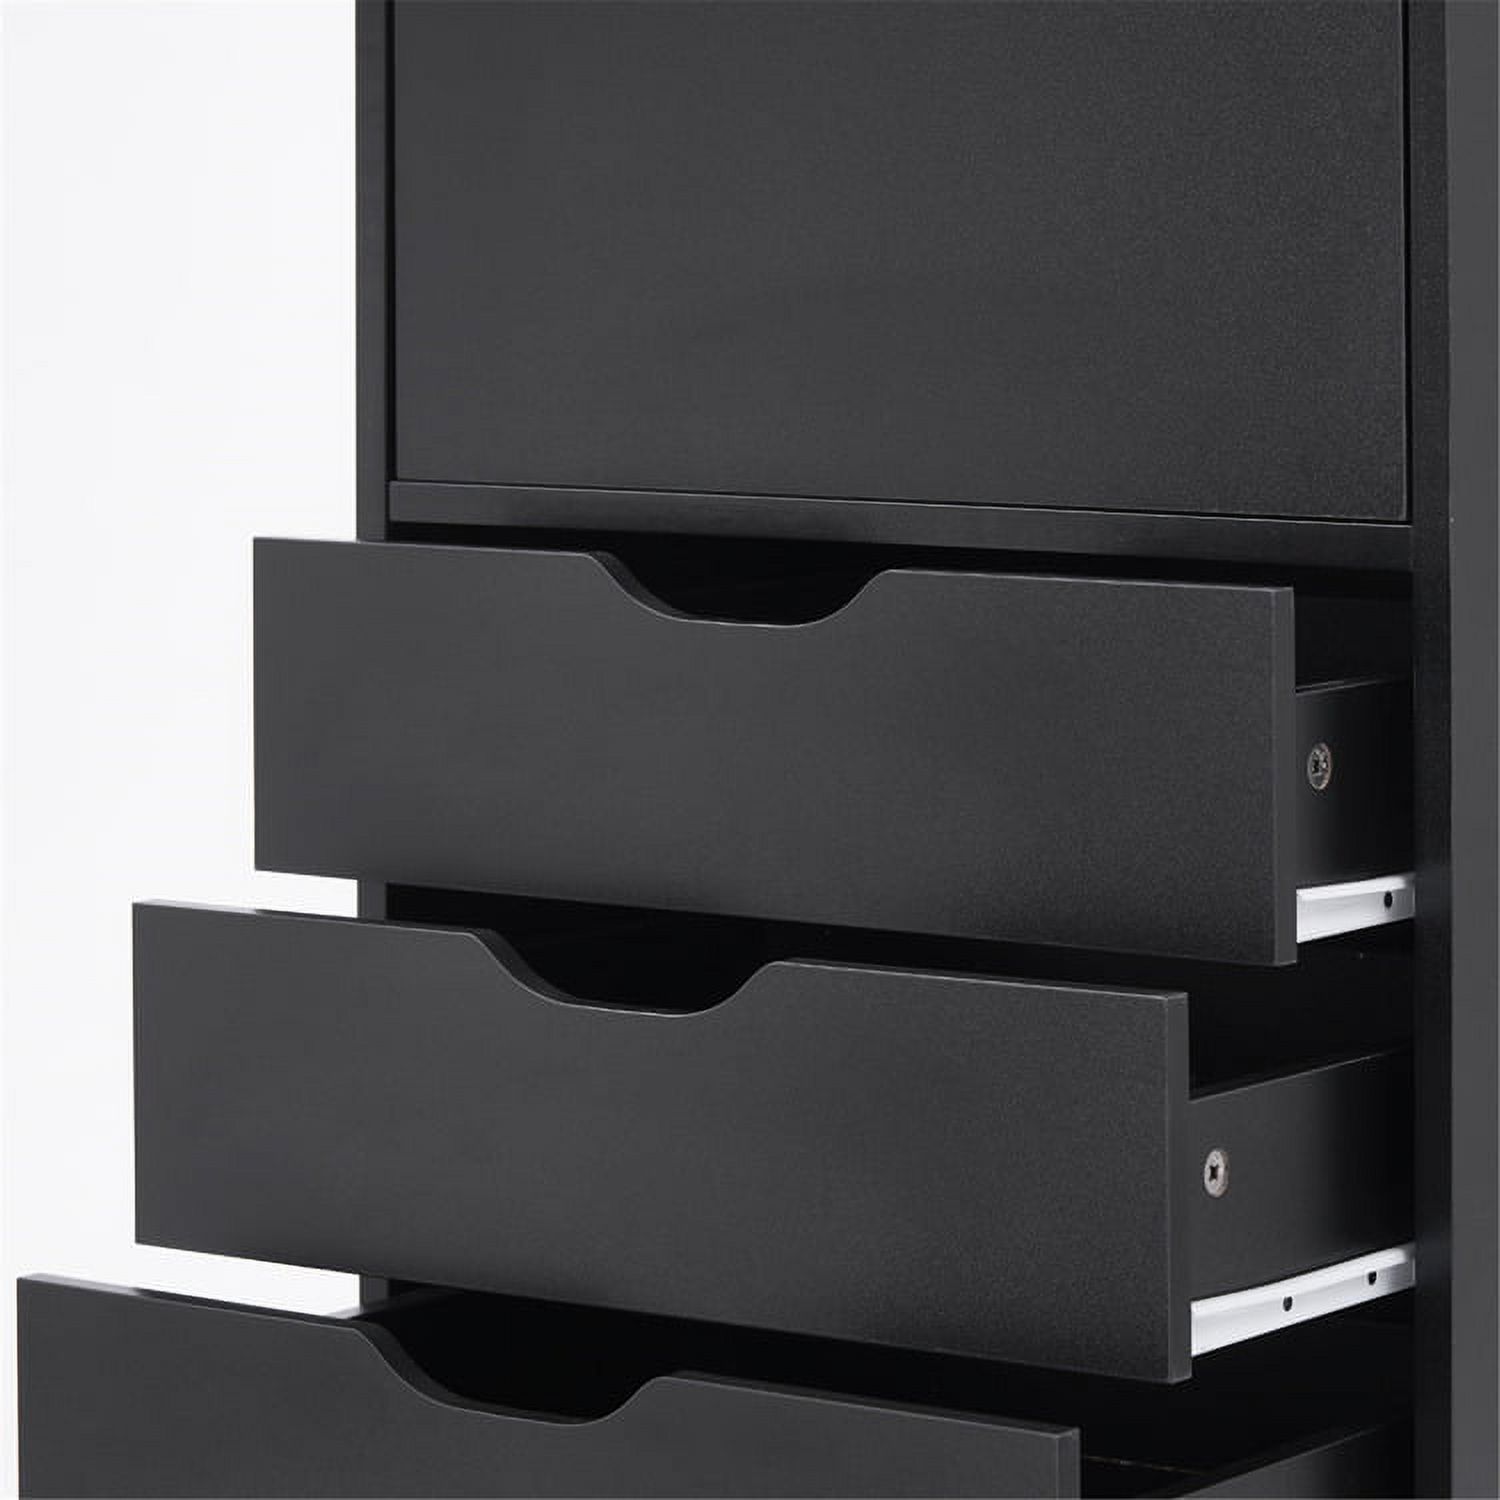 Office File Cabinets Wooden File Cabinets for Home Office Lateral File Cabinet Wood File Cabinet Mobile File Cabinet Mobile Storage Cabinet Filing Storage Drawer Cabinet by Naomi Home Black / 6 Drawer - image 4 of 5